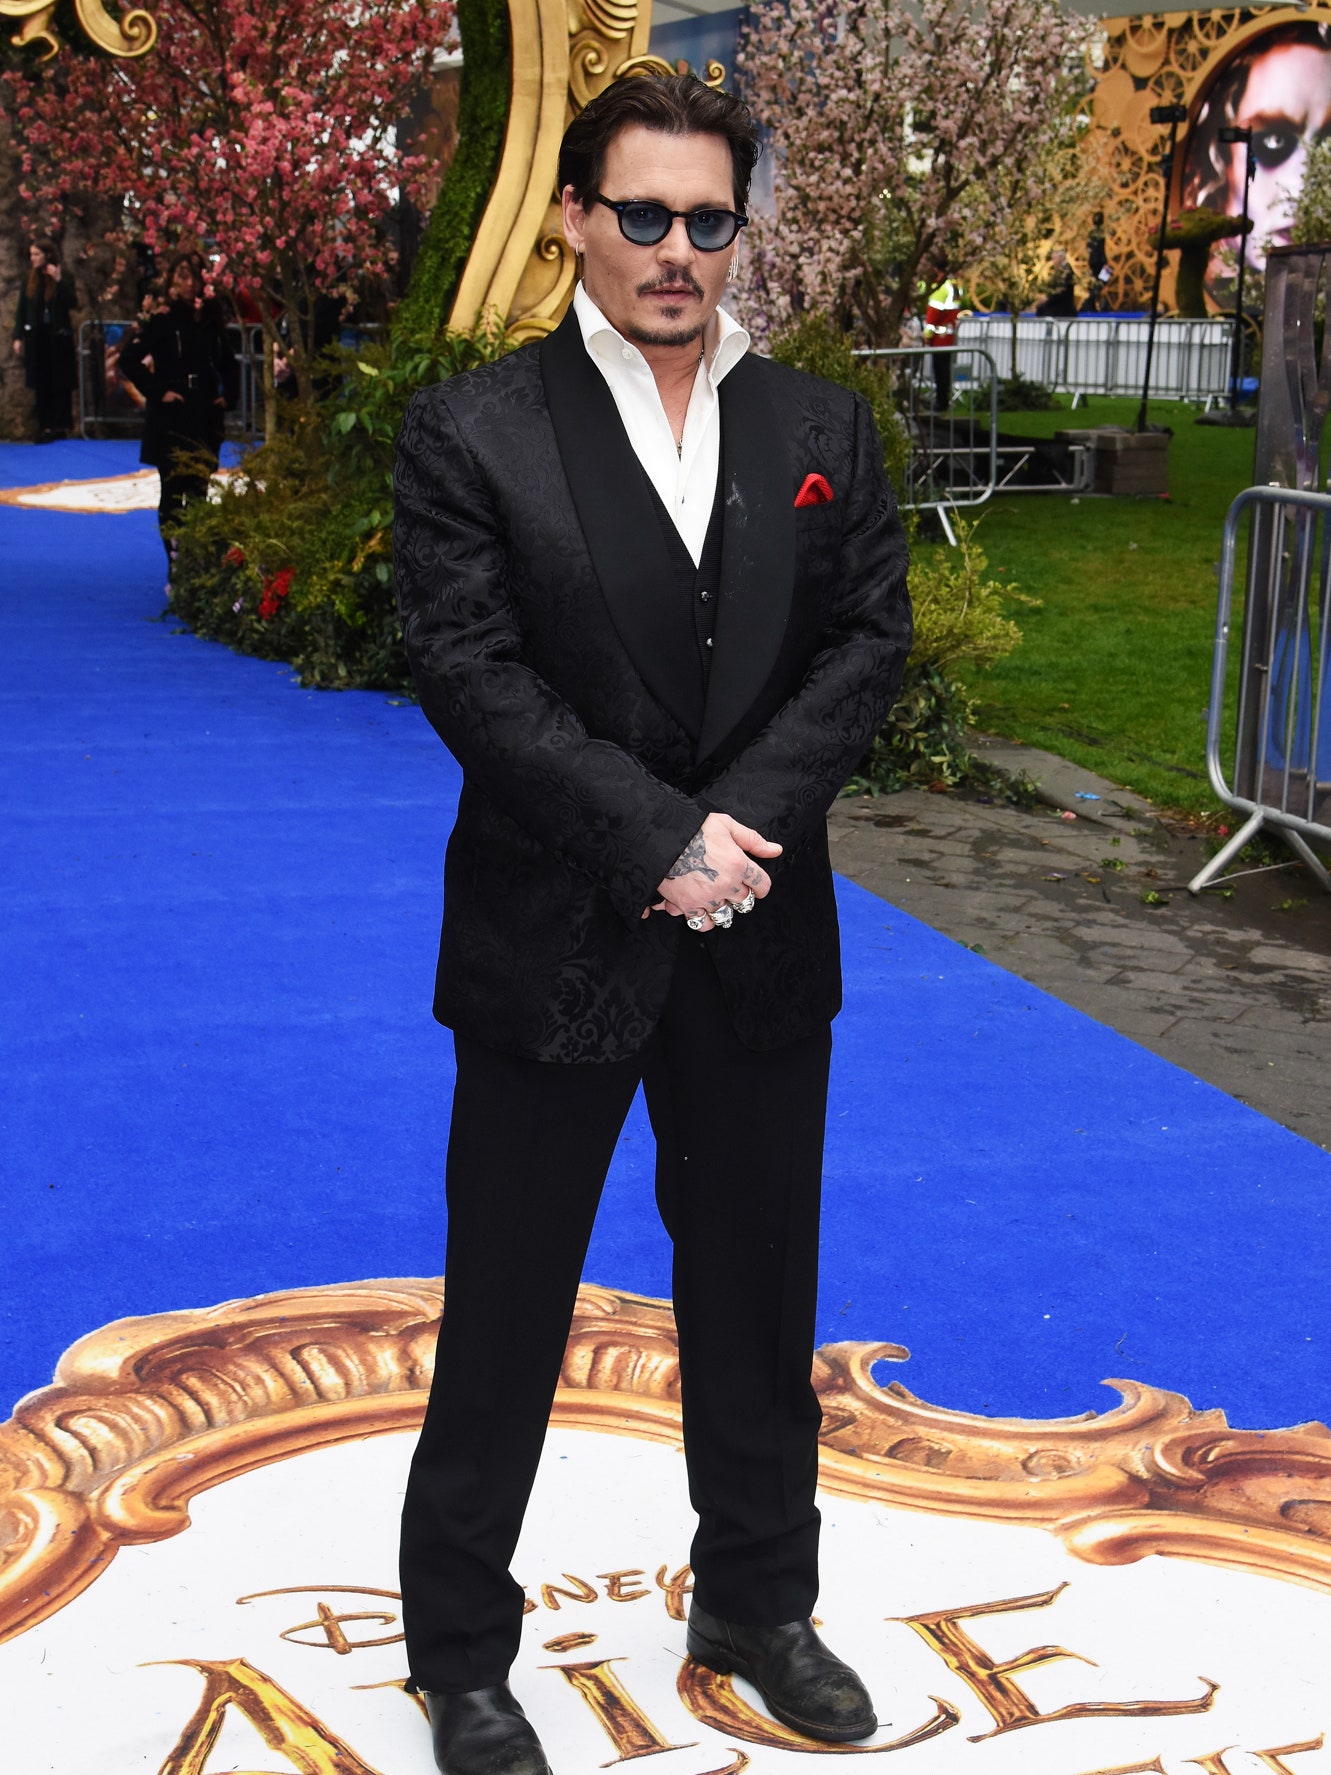 Best looks of Johnny Depp in suits: Classy ever